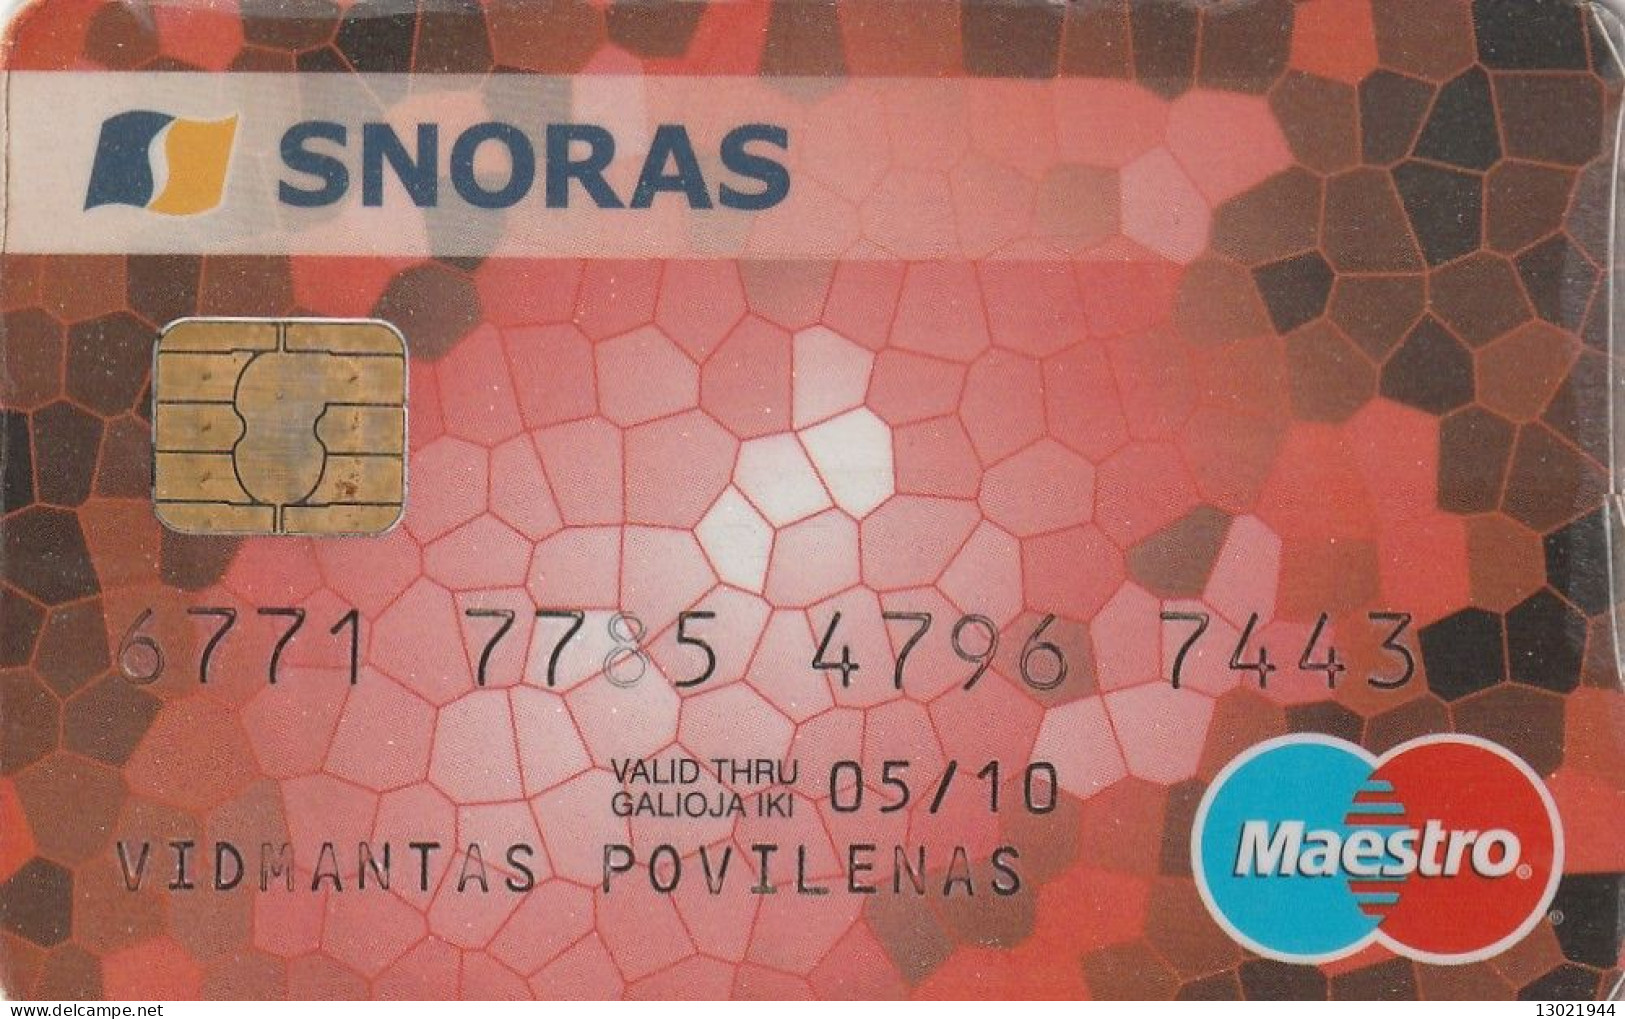 N.4 LITUANIA BANK  CARDS - POSSIBLE SALE OF SINGLE CARDS - Credit Cards (Exp. Date Min. 10 Years)